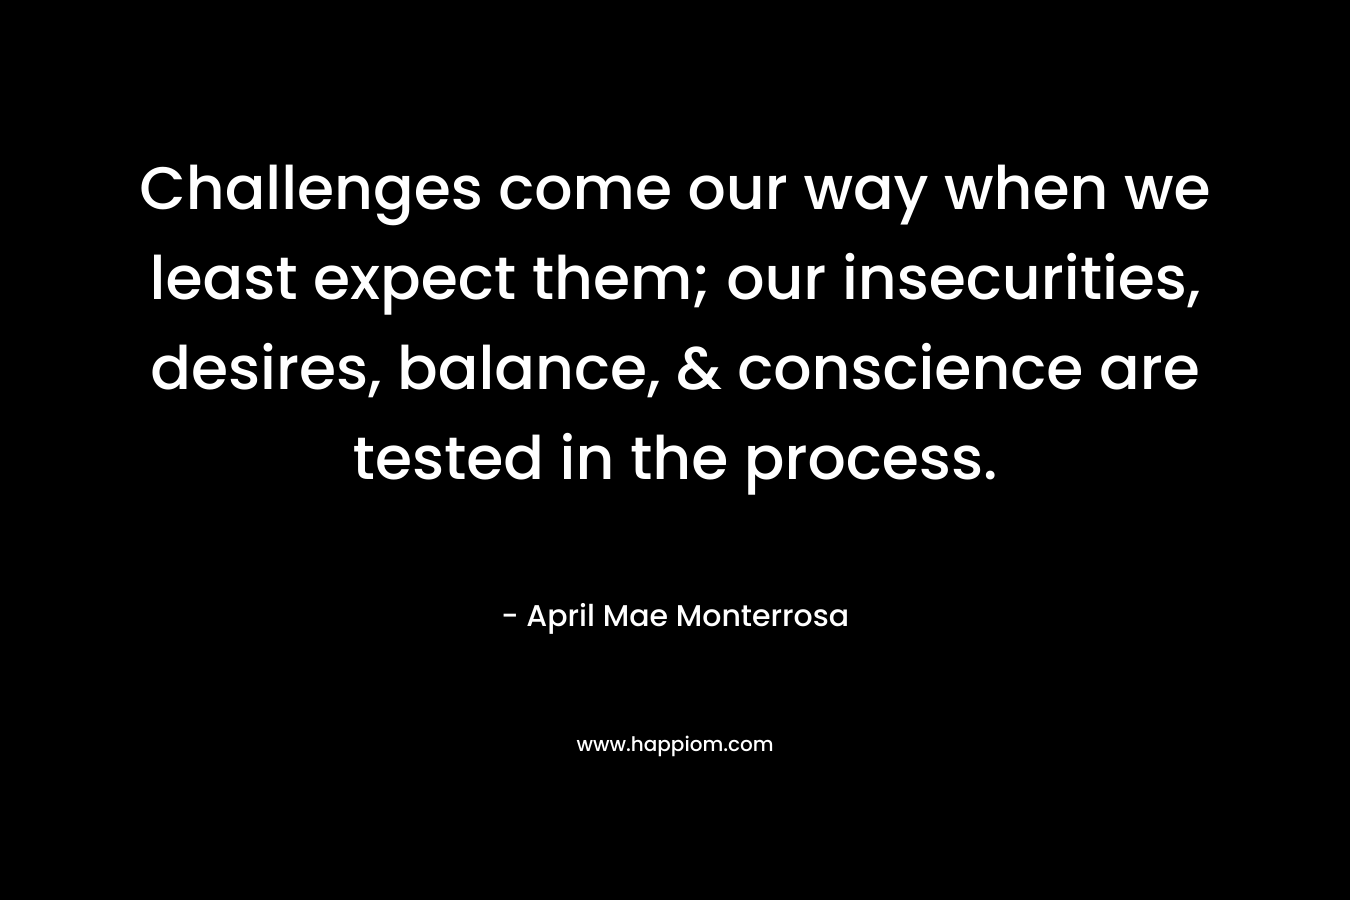 Challenges come our way when we least expect them; our insecurities, desires, balance, & conscience are tested in the process.